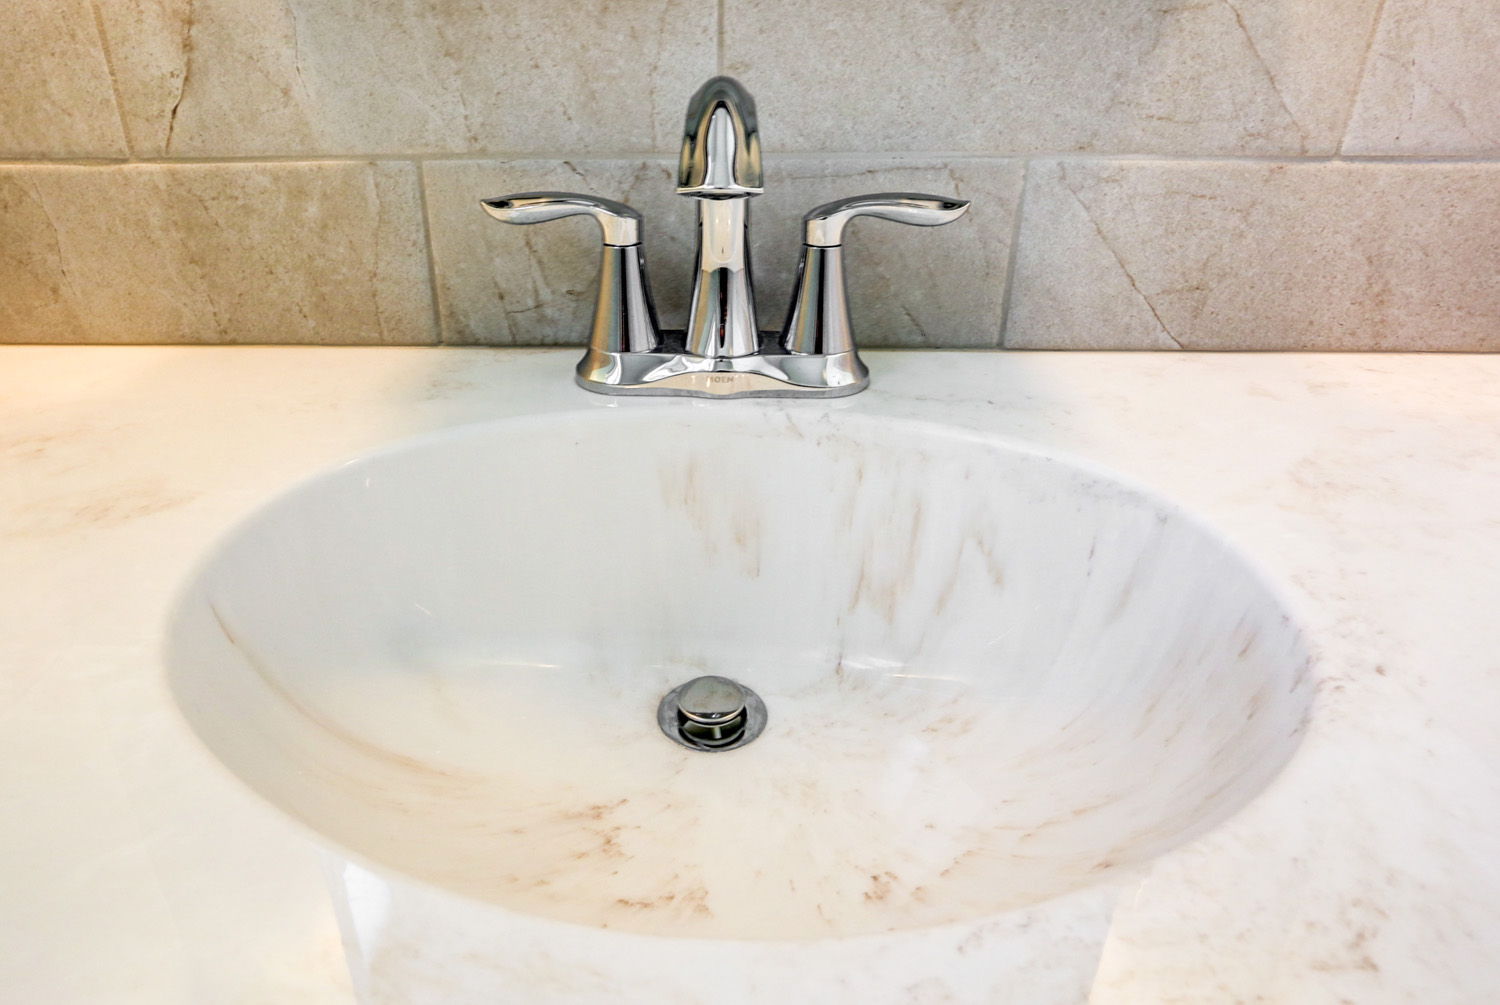 Swirl marble countertop with chrome faucet in Landisville Bathroom Remodel